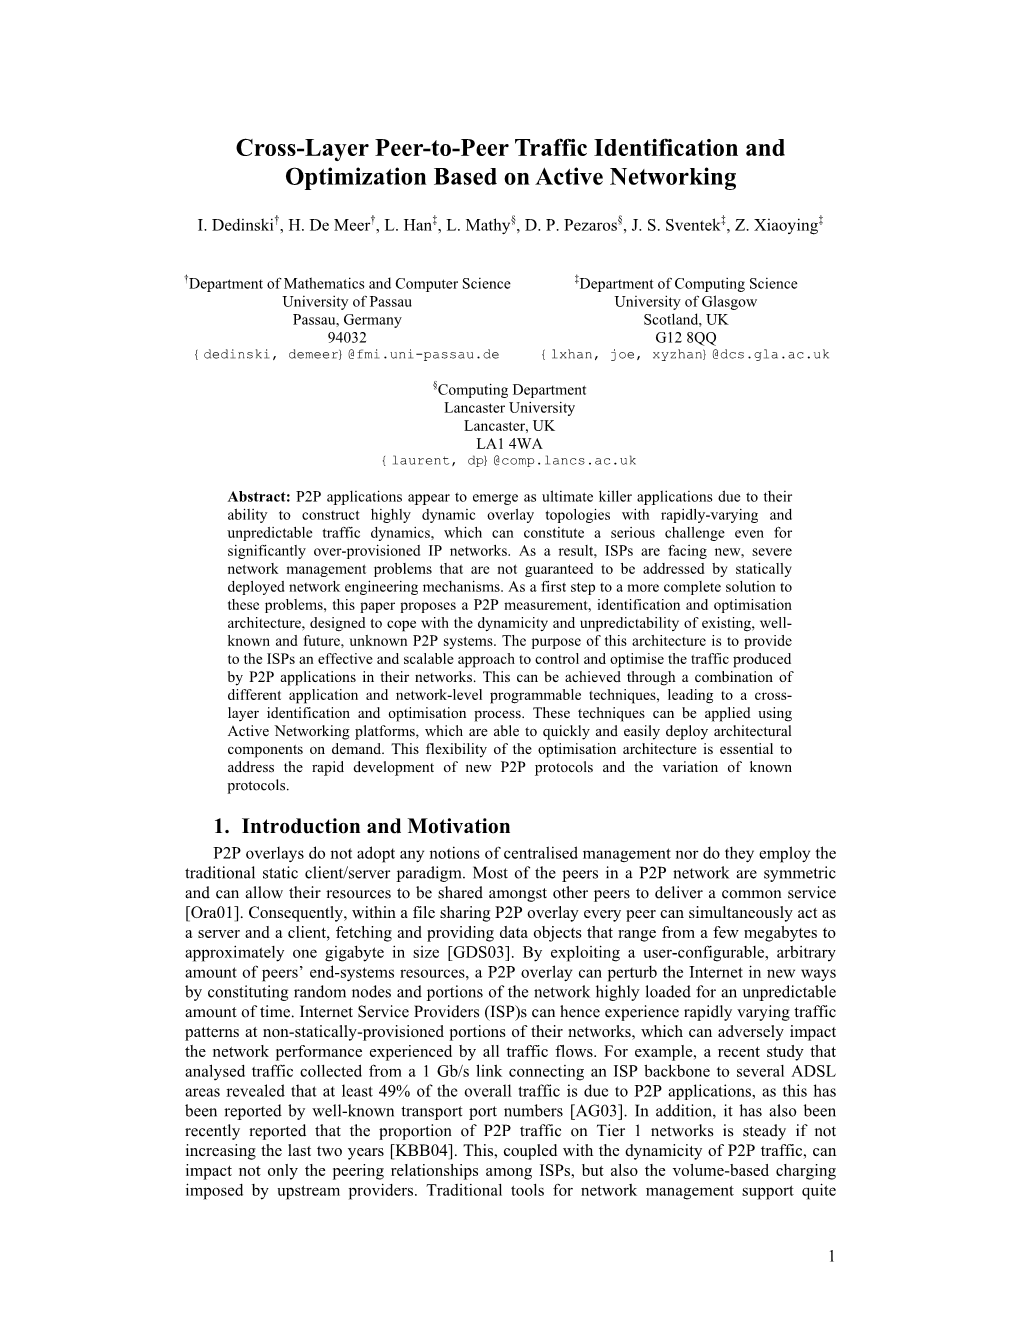 Cross-Layer Peer-To-Peer Traffic Identification and Optimization Based on Active Networking